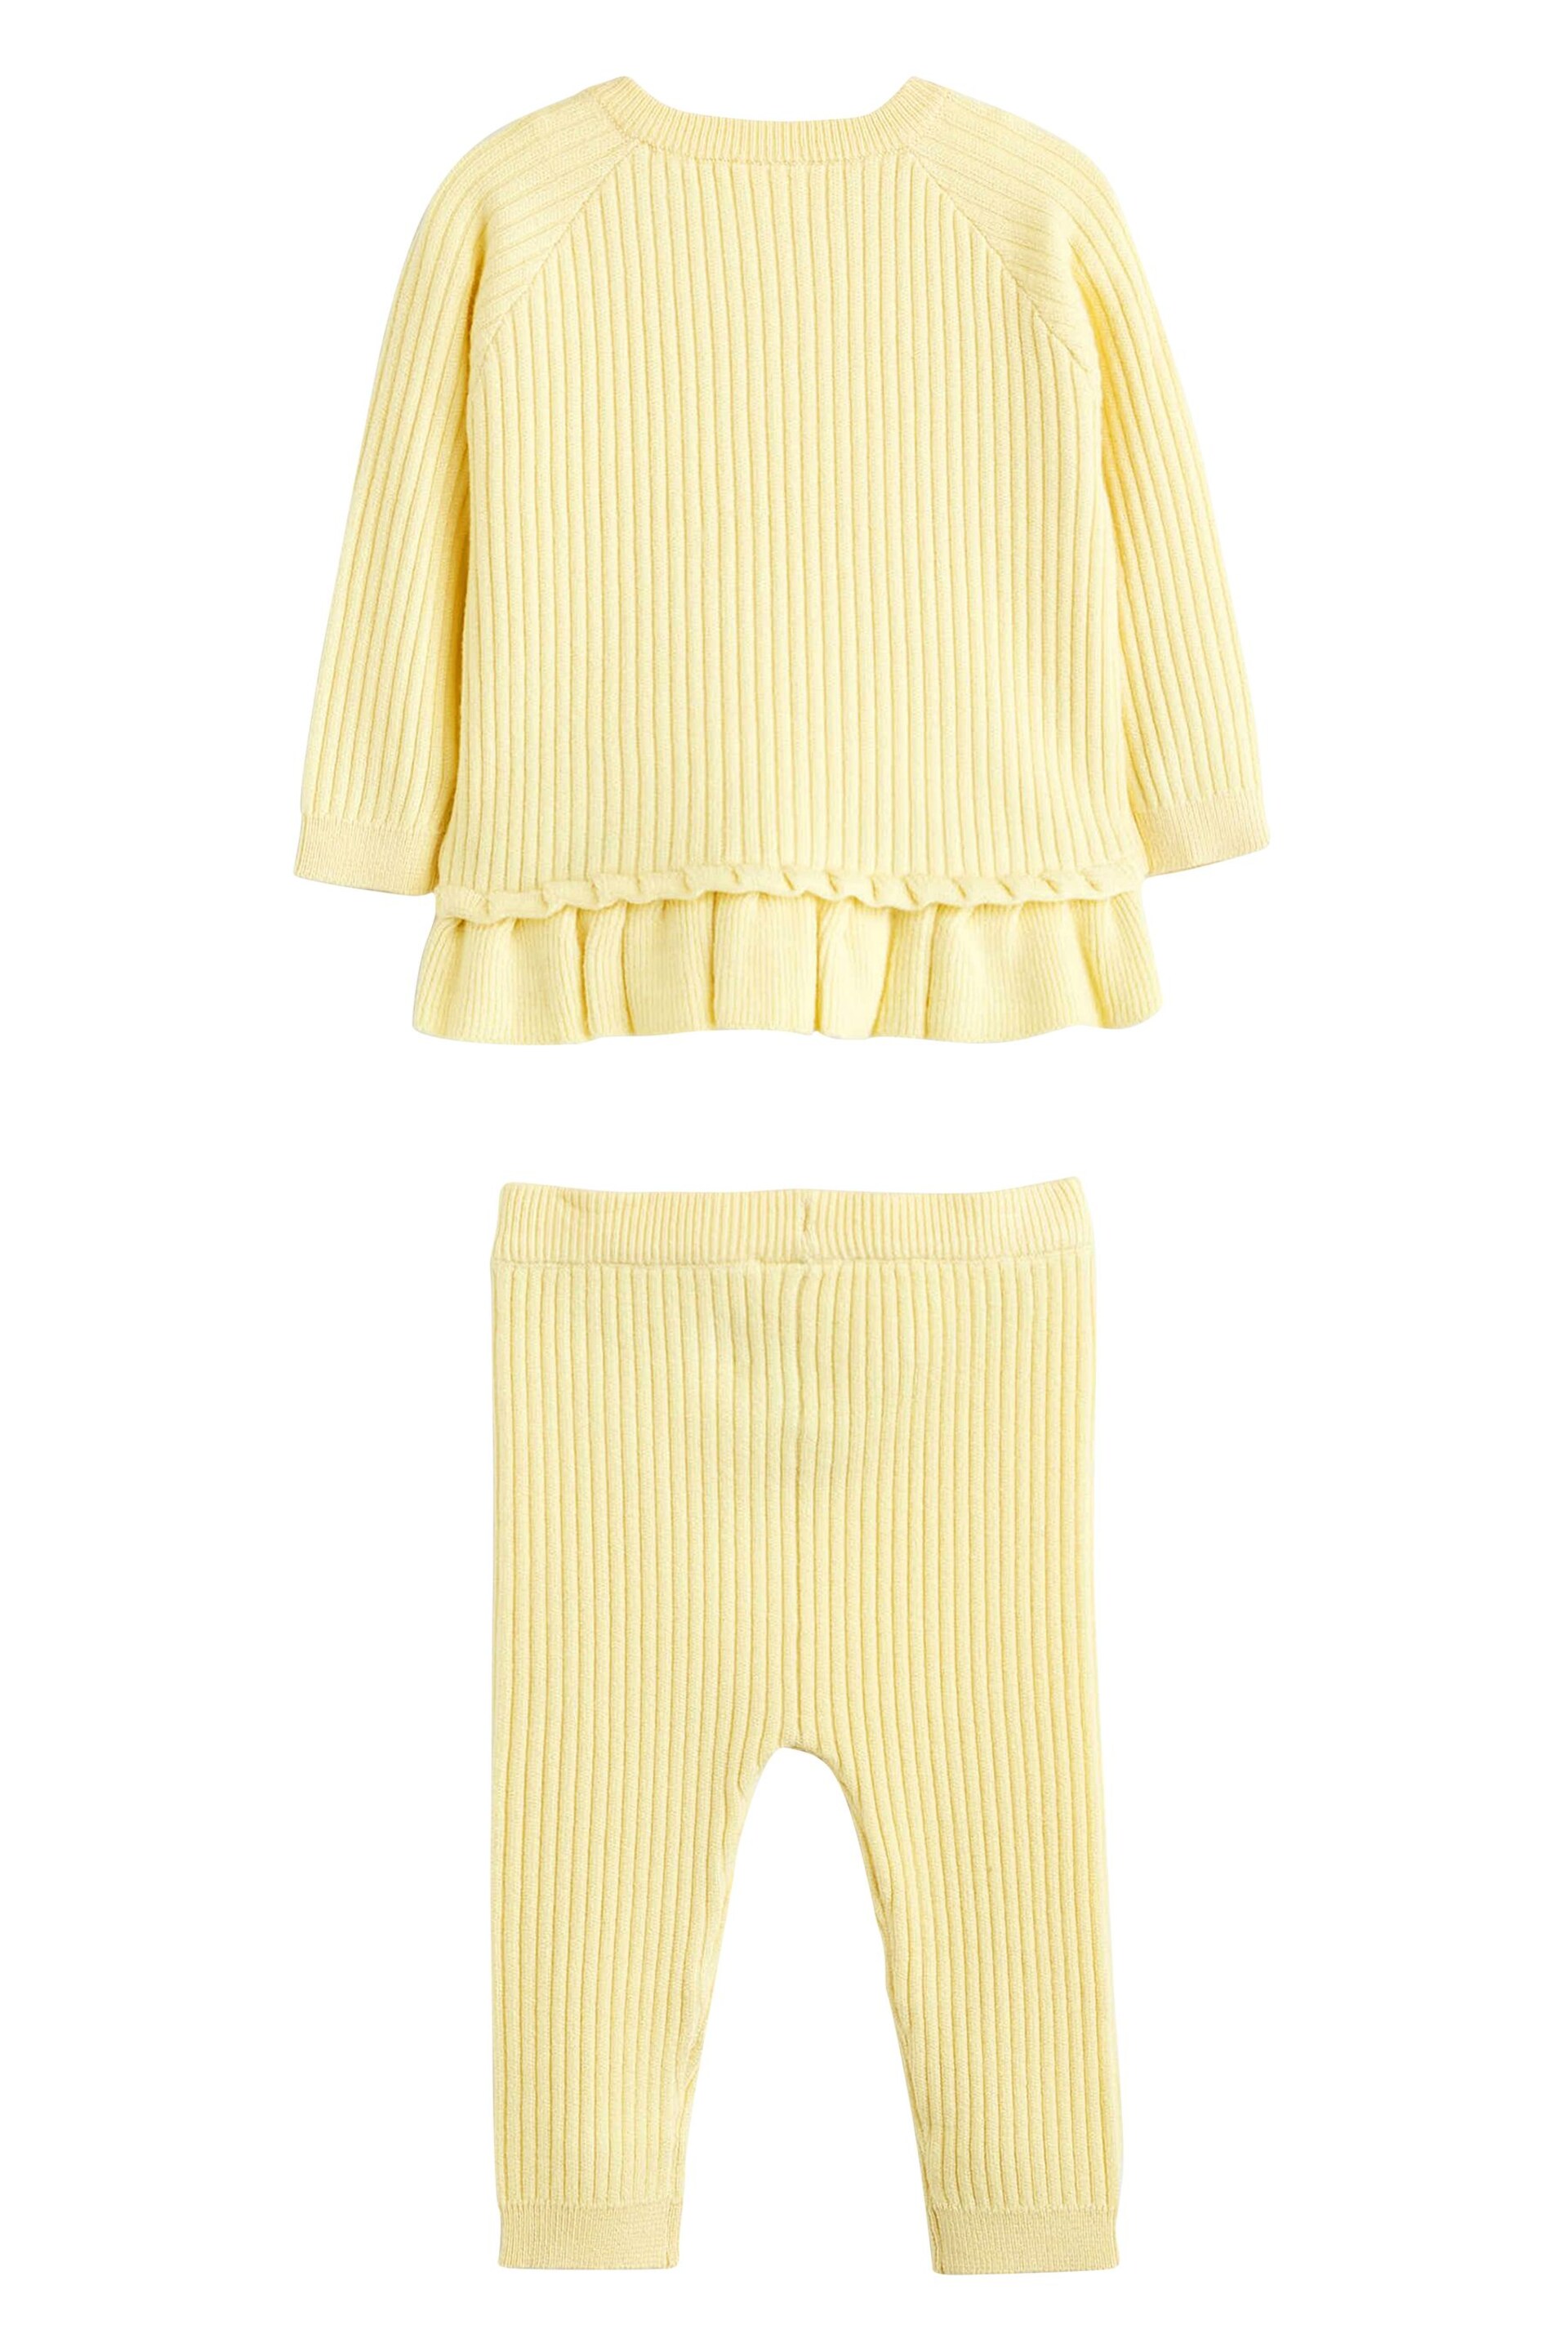 Buttermilk Yellow Knitted Baby 2 Piece Set (0mths-2yrs) - Image 7 of 7